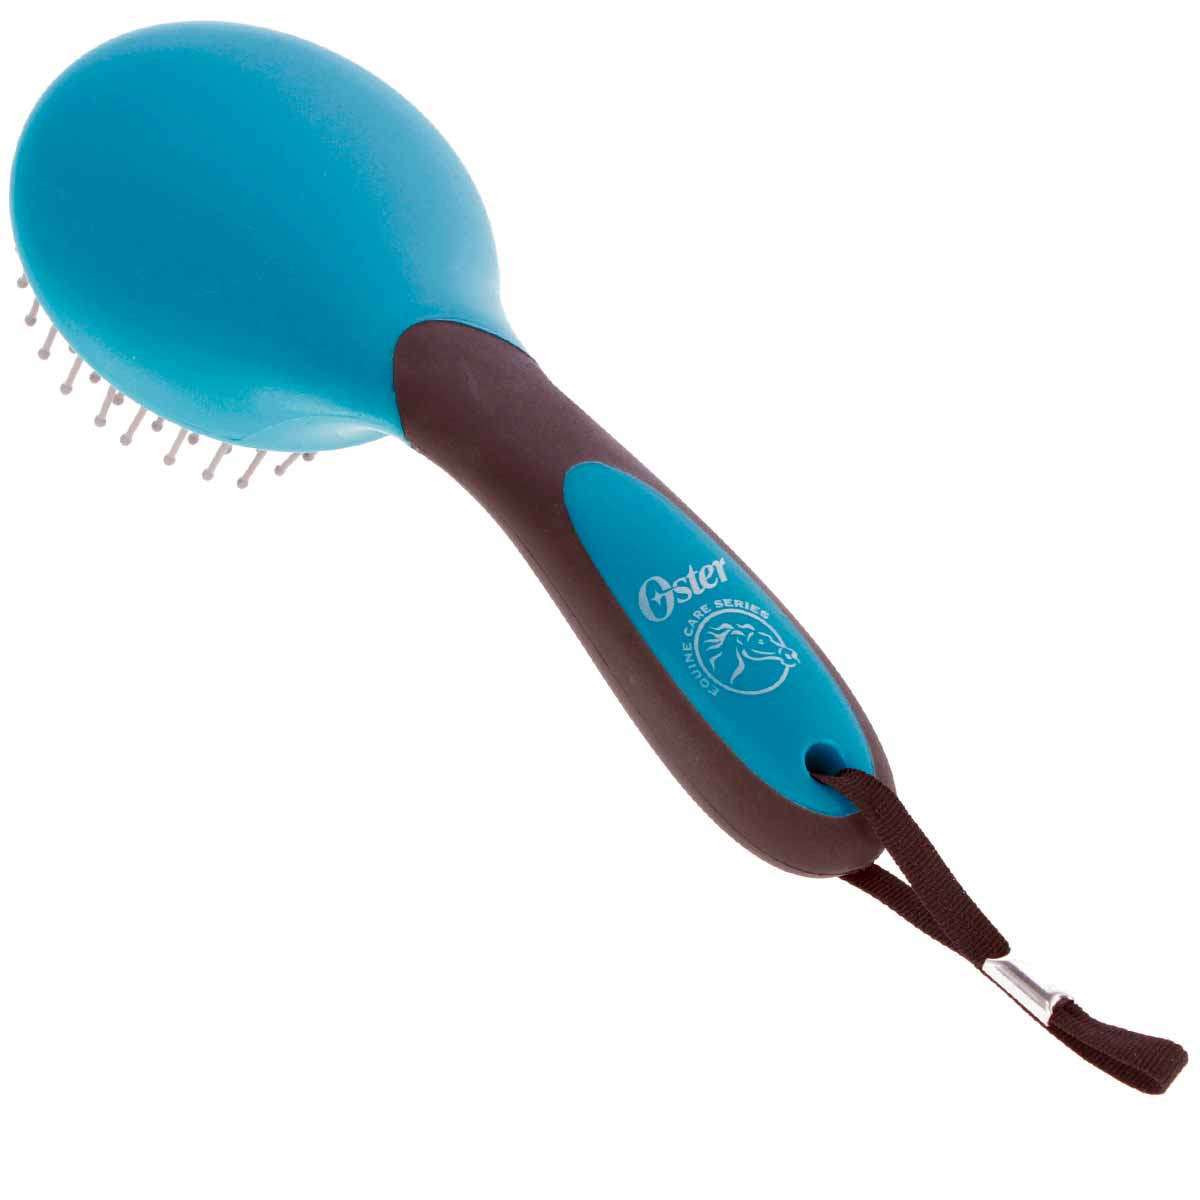 Oster Equine Care Series mane and tail brush turquoise